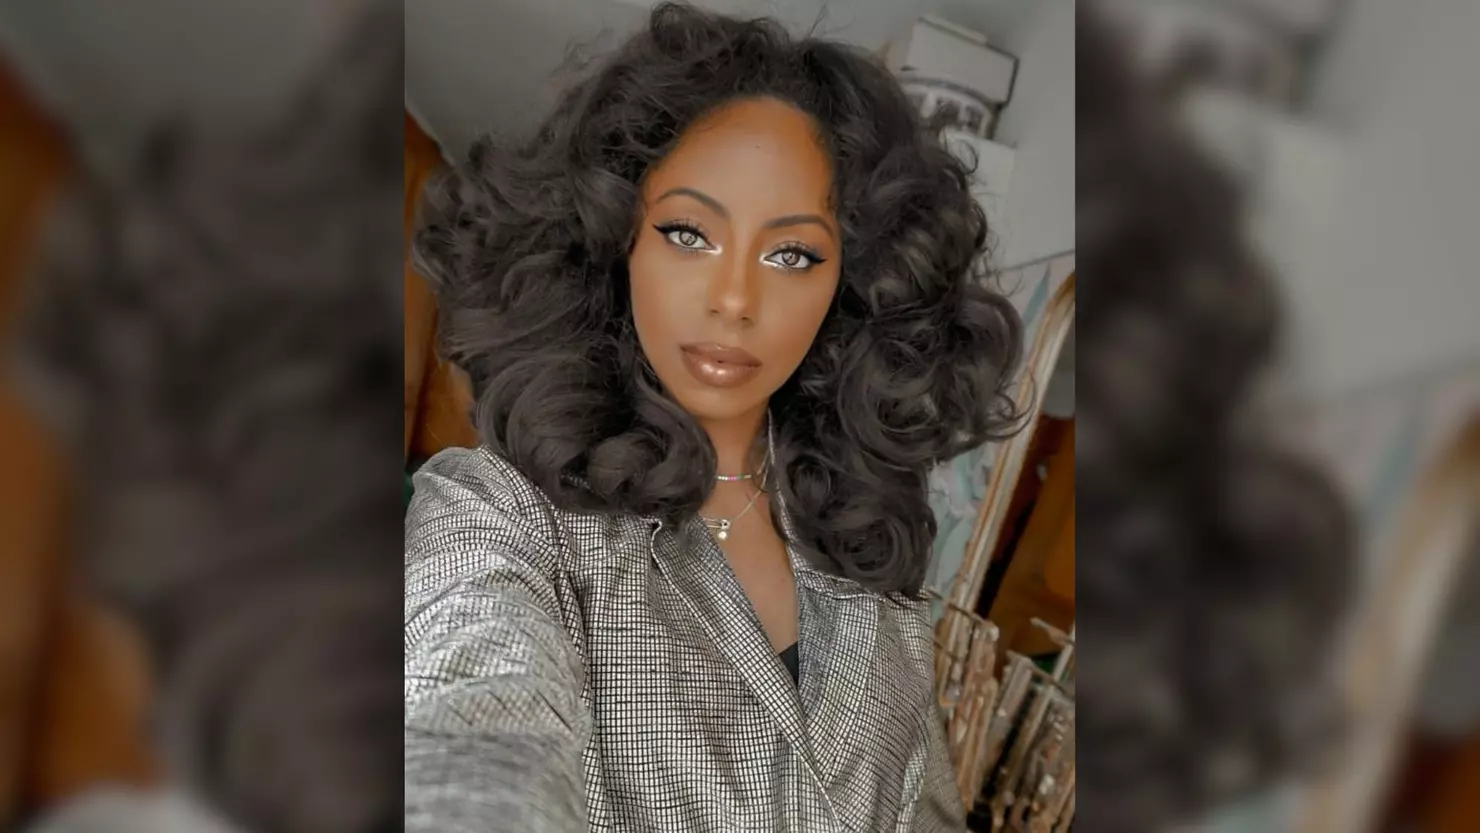 Beauty Vlogger Jessica Pettway Dead at 36, From Cervical Cancer After Being Misdiagnosed With Fibroids